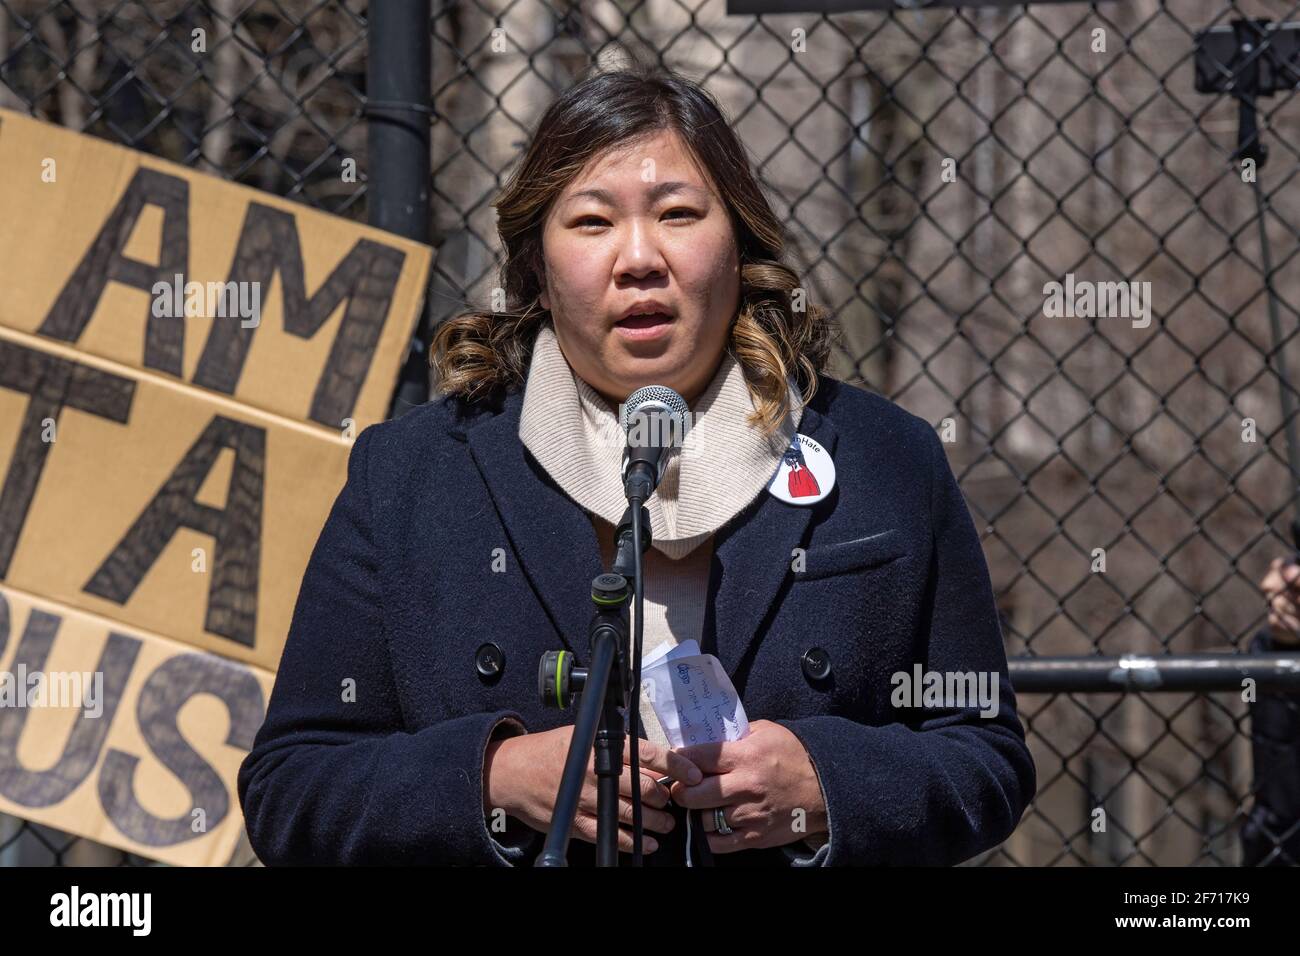 NEW YORK, NY - APRIL 3: Congresswoman Grace Meng (D-NY) speaks at a rally against hate in Columbus Park in the Chinatown neighborhood of Manhattan on April 3, 2021 in New York City. A rally for solidarity was organized in response to a rise in hate crimes against the Asian community since the start of the coronavirus (COVID-19) pandemic in 2020. On March 16 in Atlanta, Georgia, a man went on a shooting spree in three spas that left eight people dead, including six Asian women. Stock Photo